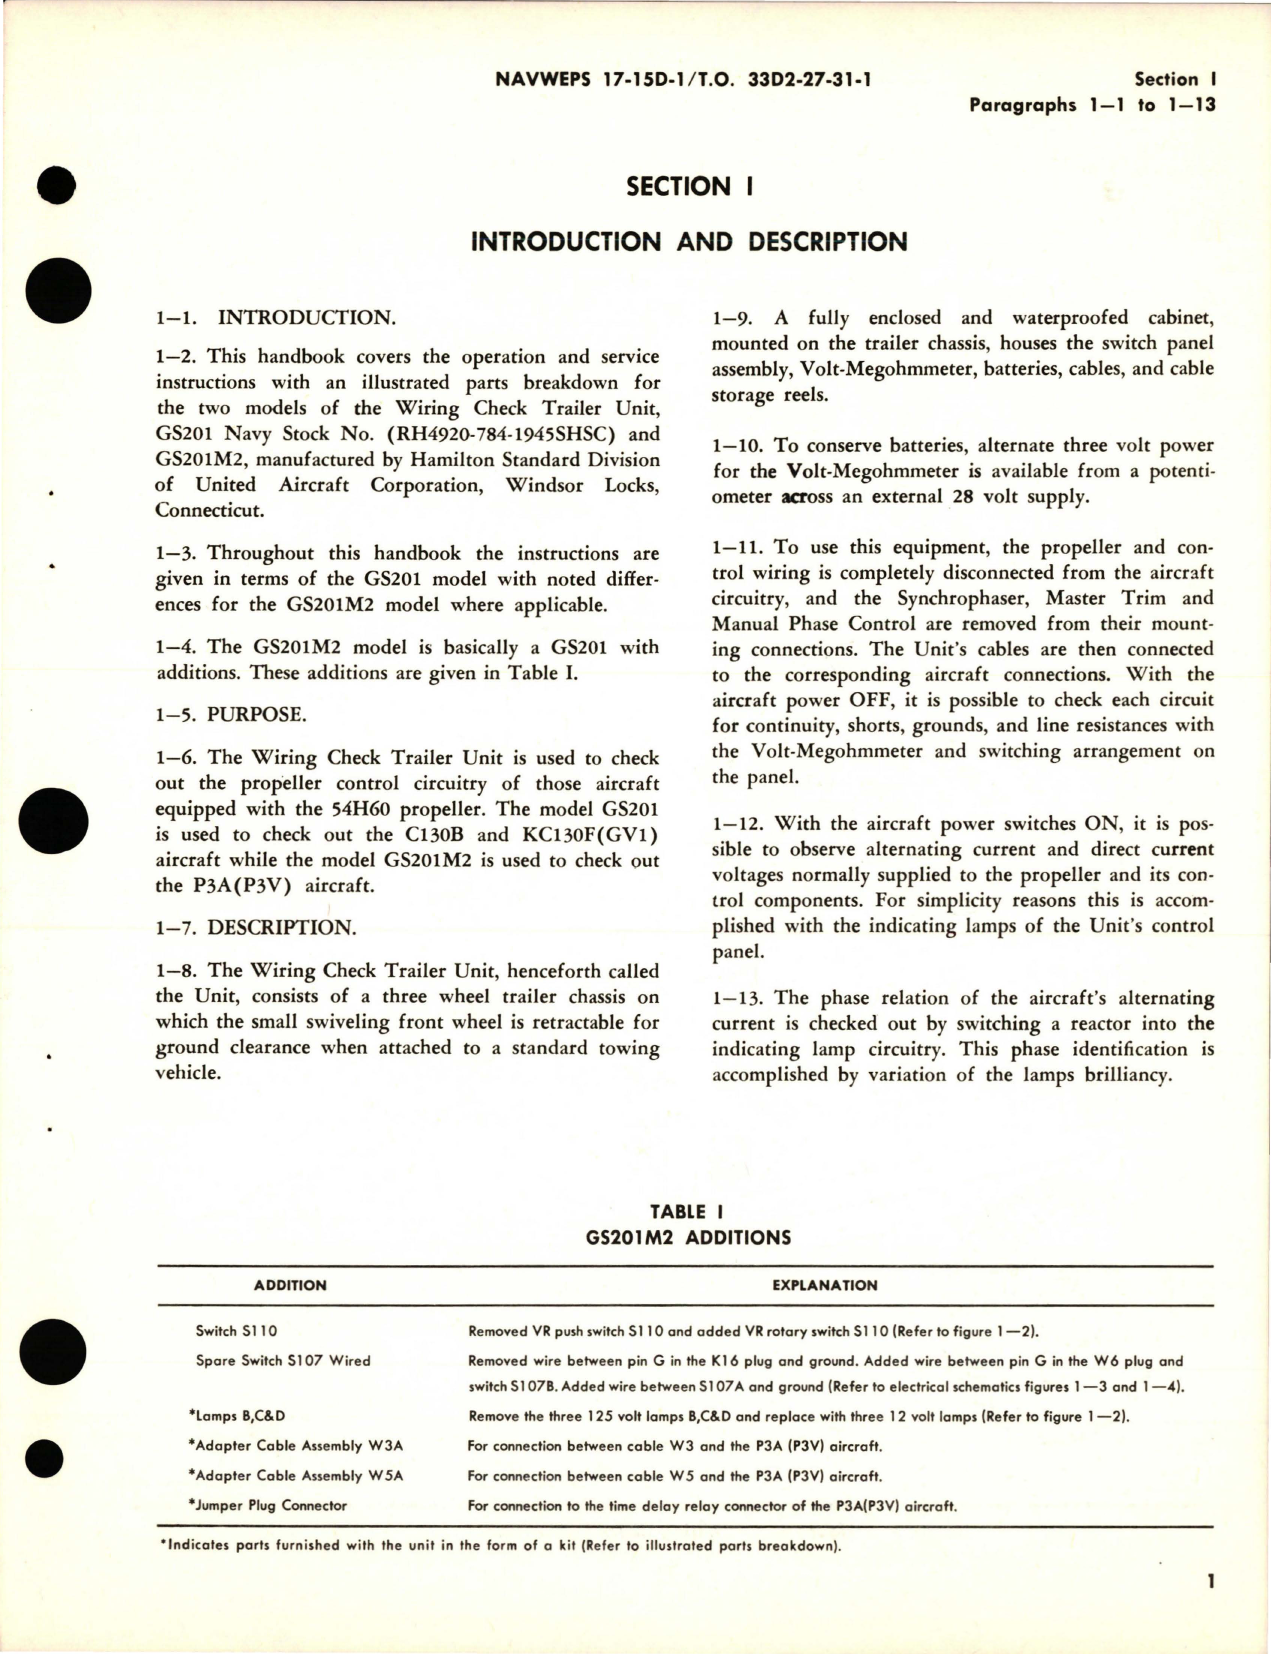 Sample page 5 from AirCorps Library document: Operations and Service Instructions with Illustrated Parts for Wiring Check Trailer Unit - Model GS201, and GS201M2